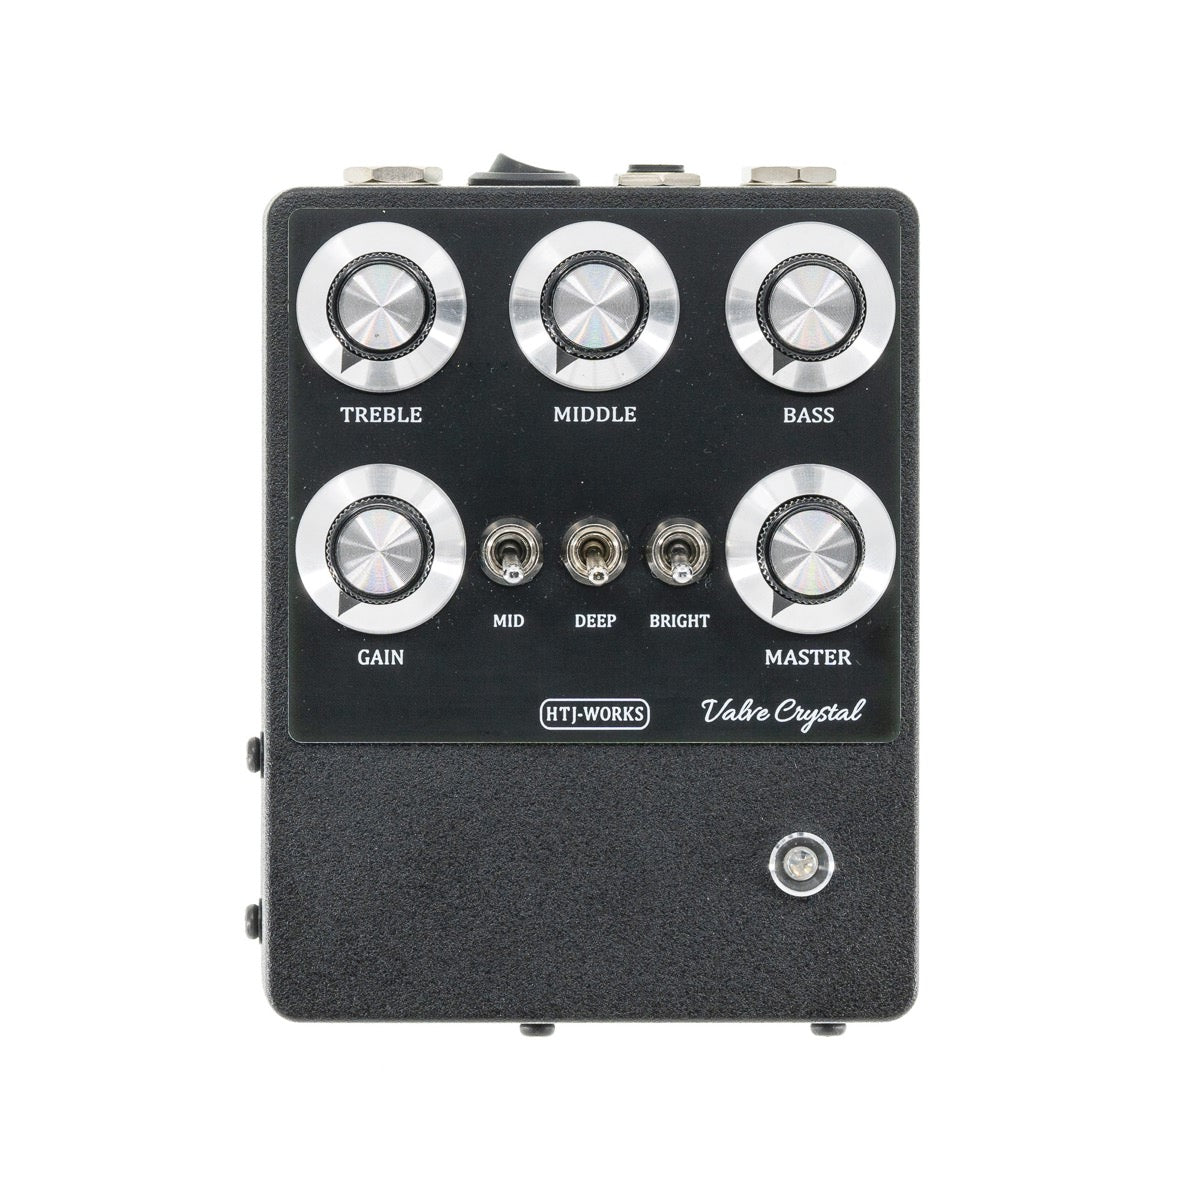 HTJ-WORKS | Valve Crystal 12AX7 | $699 | Pre-amp | Inspired by the